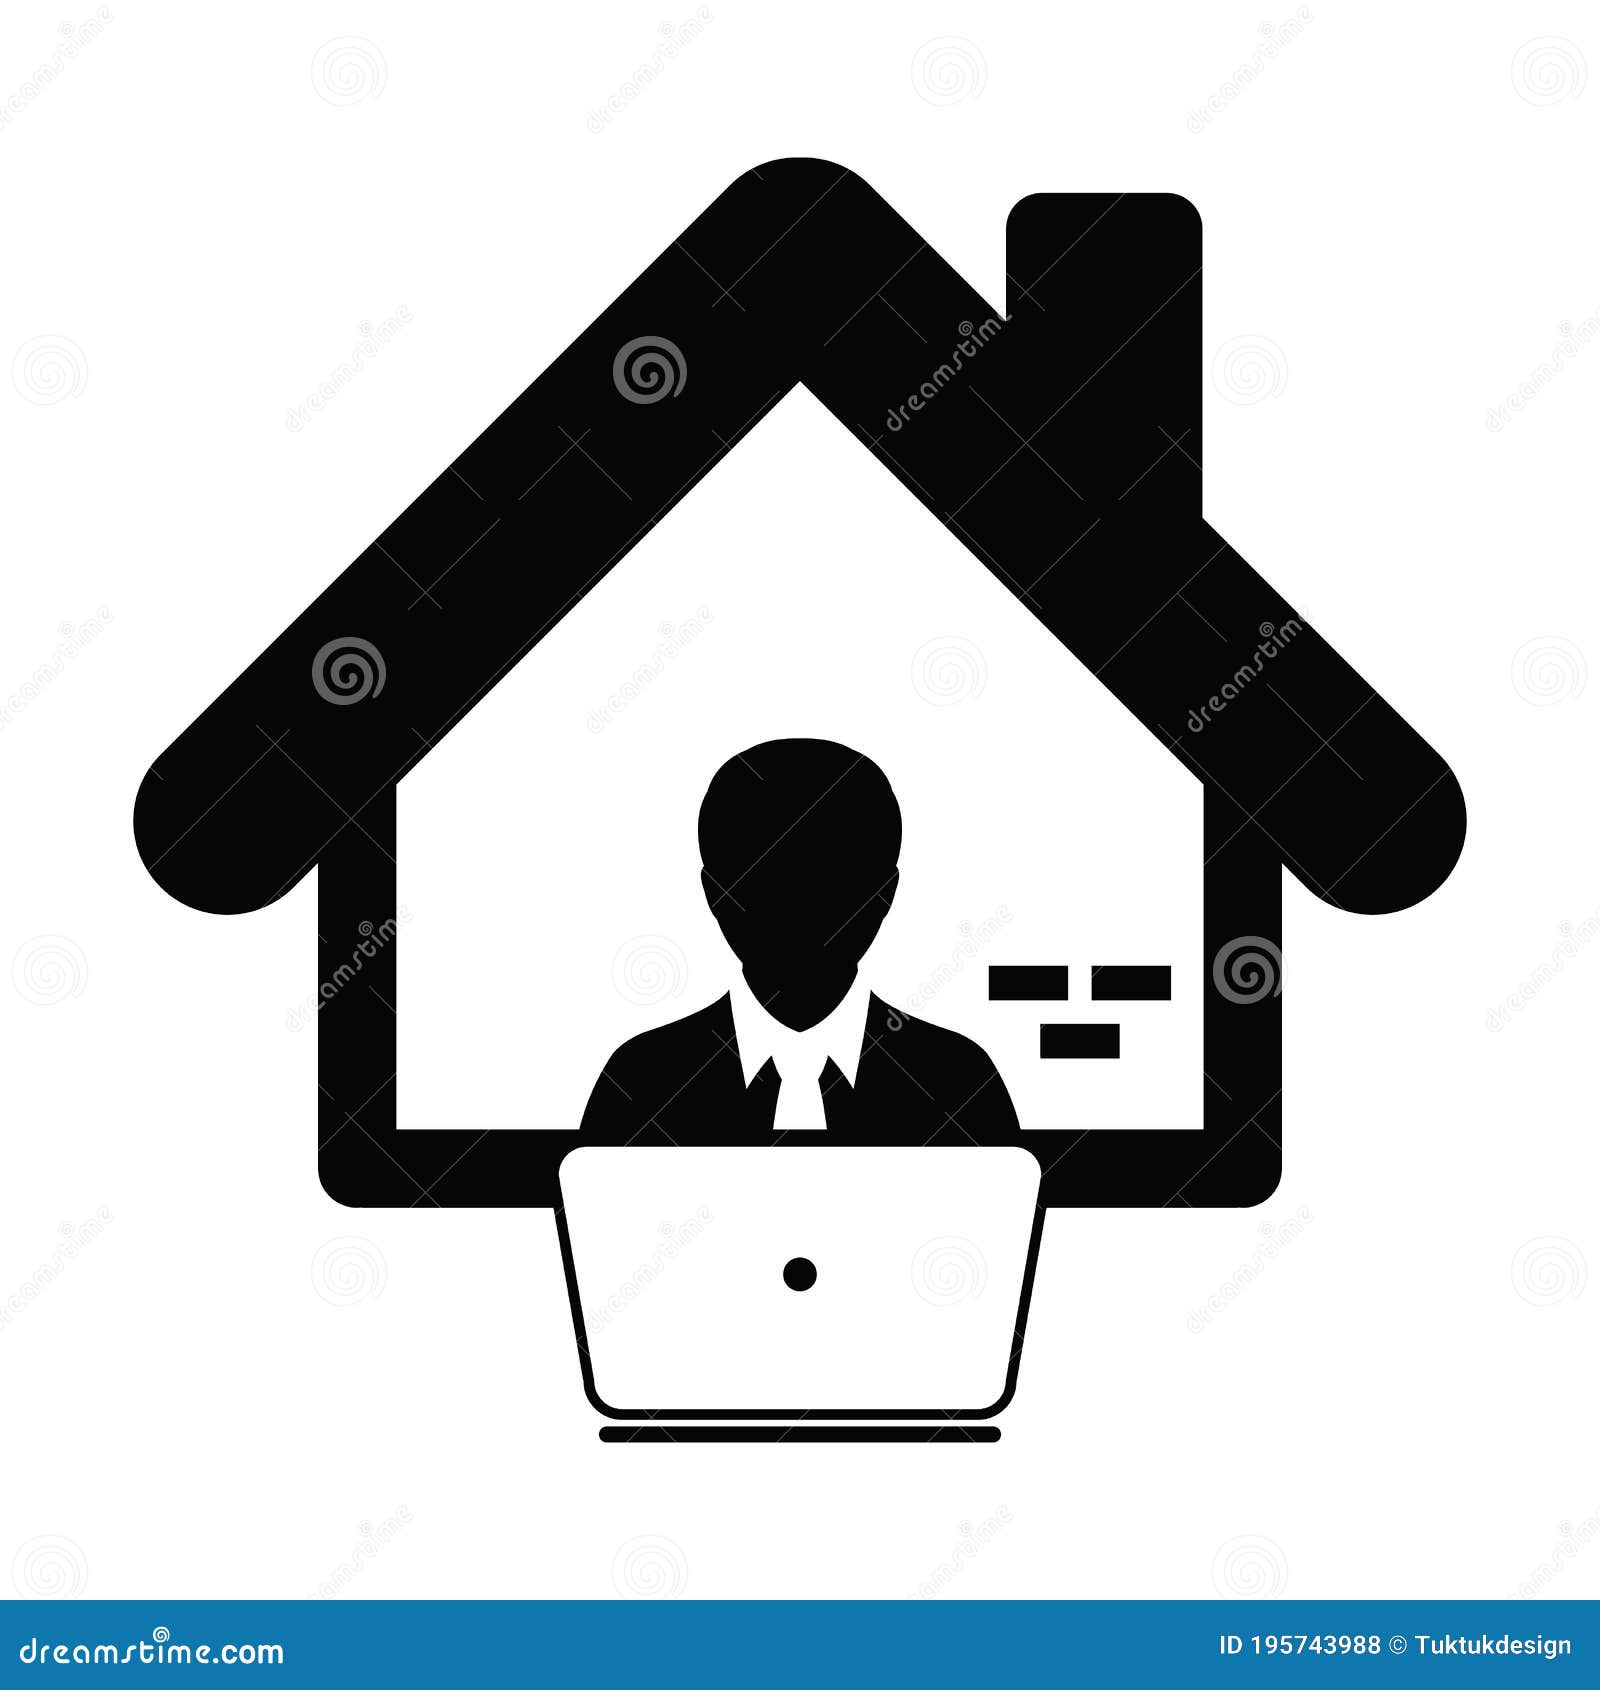 Man, user, people, Business, profile, Avatar icon